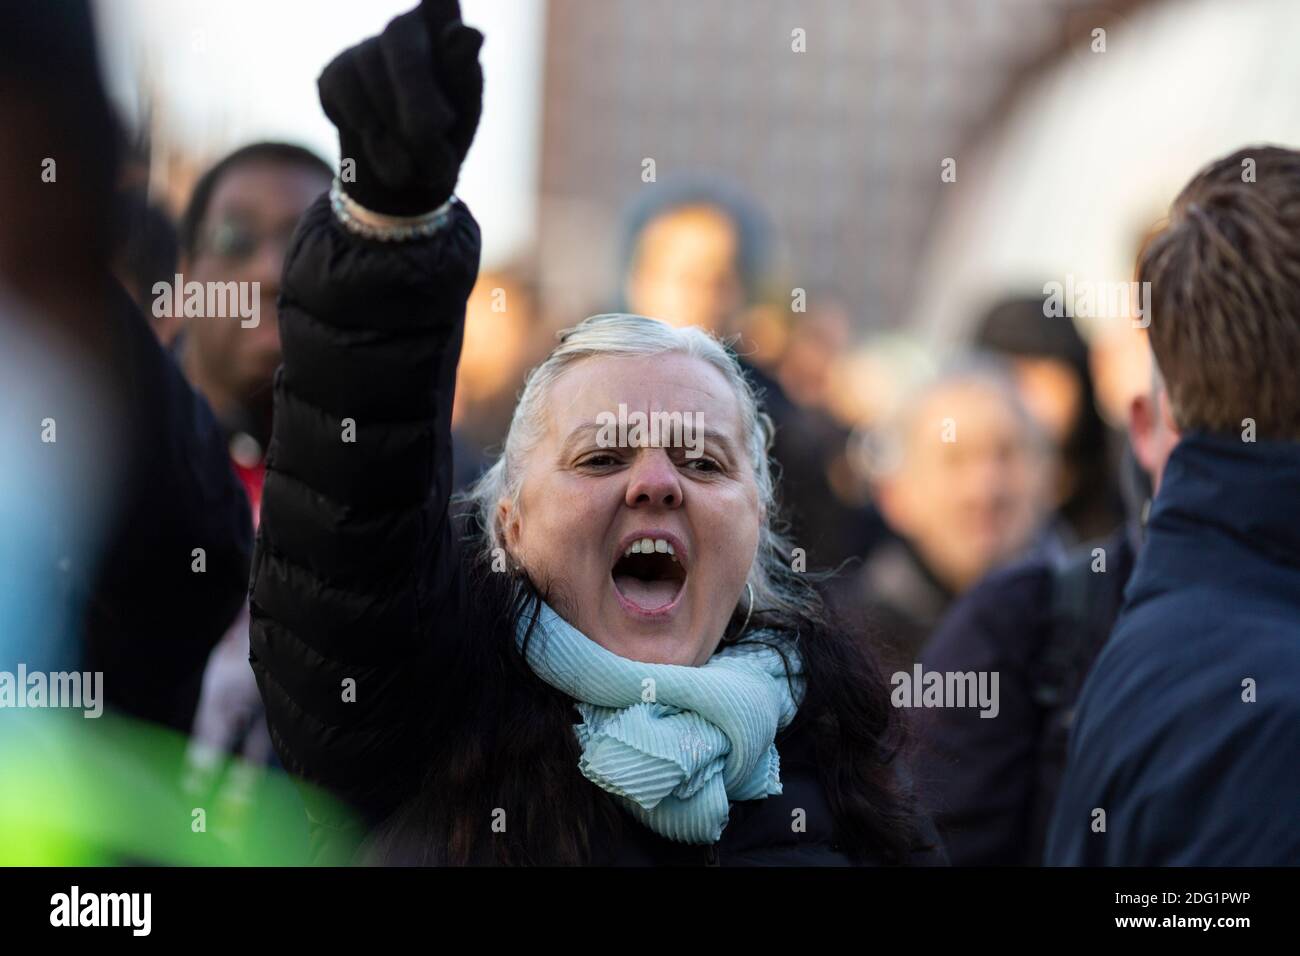 Anti-lockdown protest in Stratford, London, 5 December 2020. A female protester raises her arm and shouts. Stock Photo